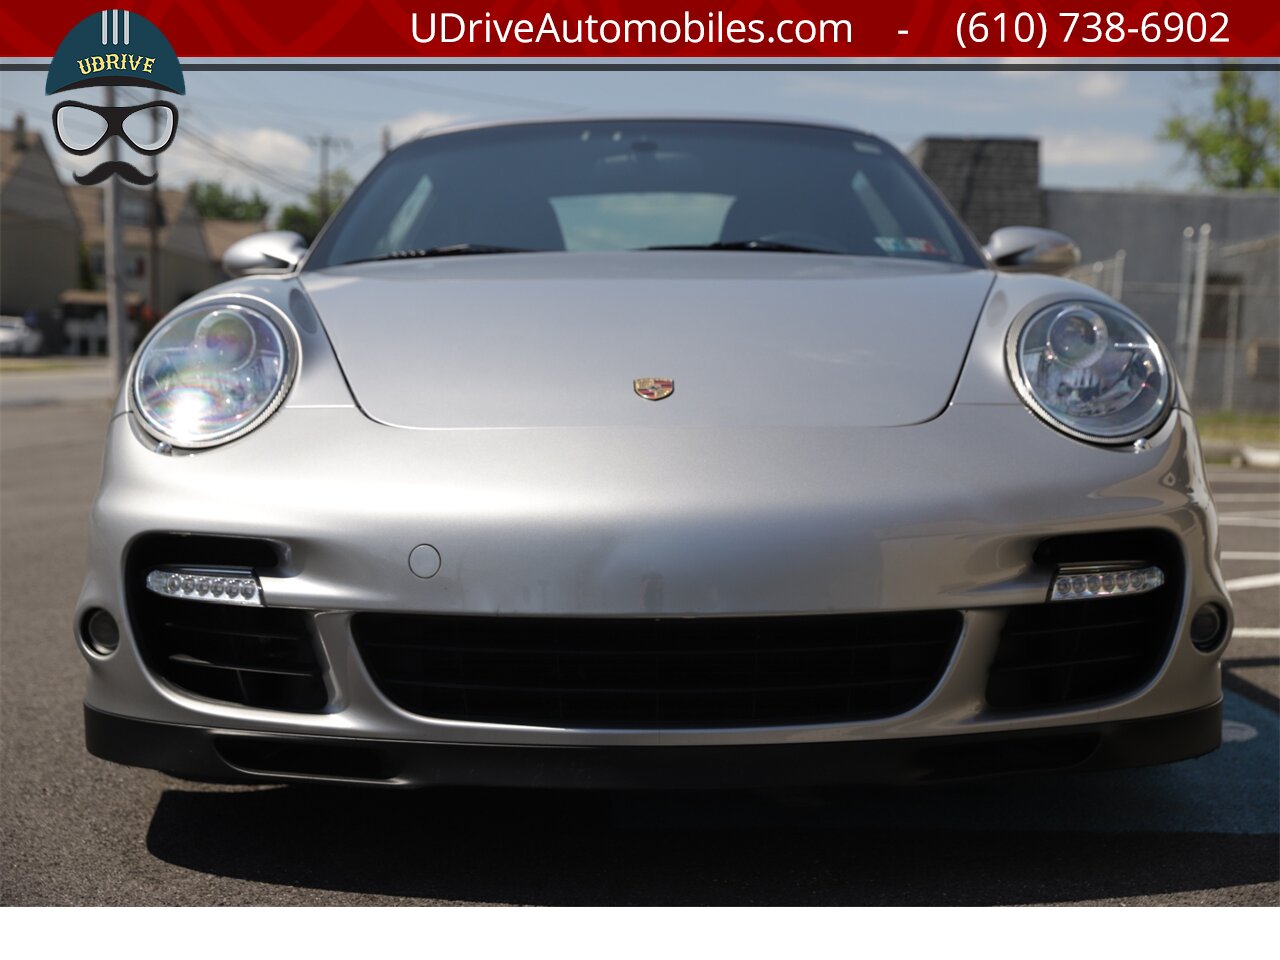 2008 Porsche 911 6 Speed Manual Turbo 997 PCCB's $149k MSRP   - Photo 12 - West Chester, PA 19382